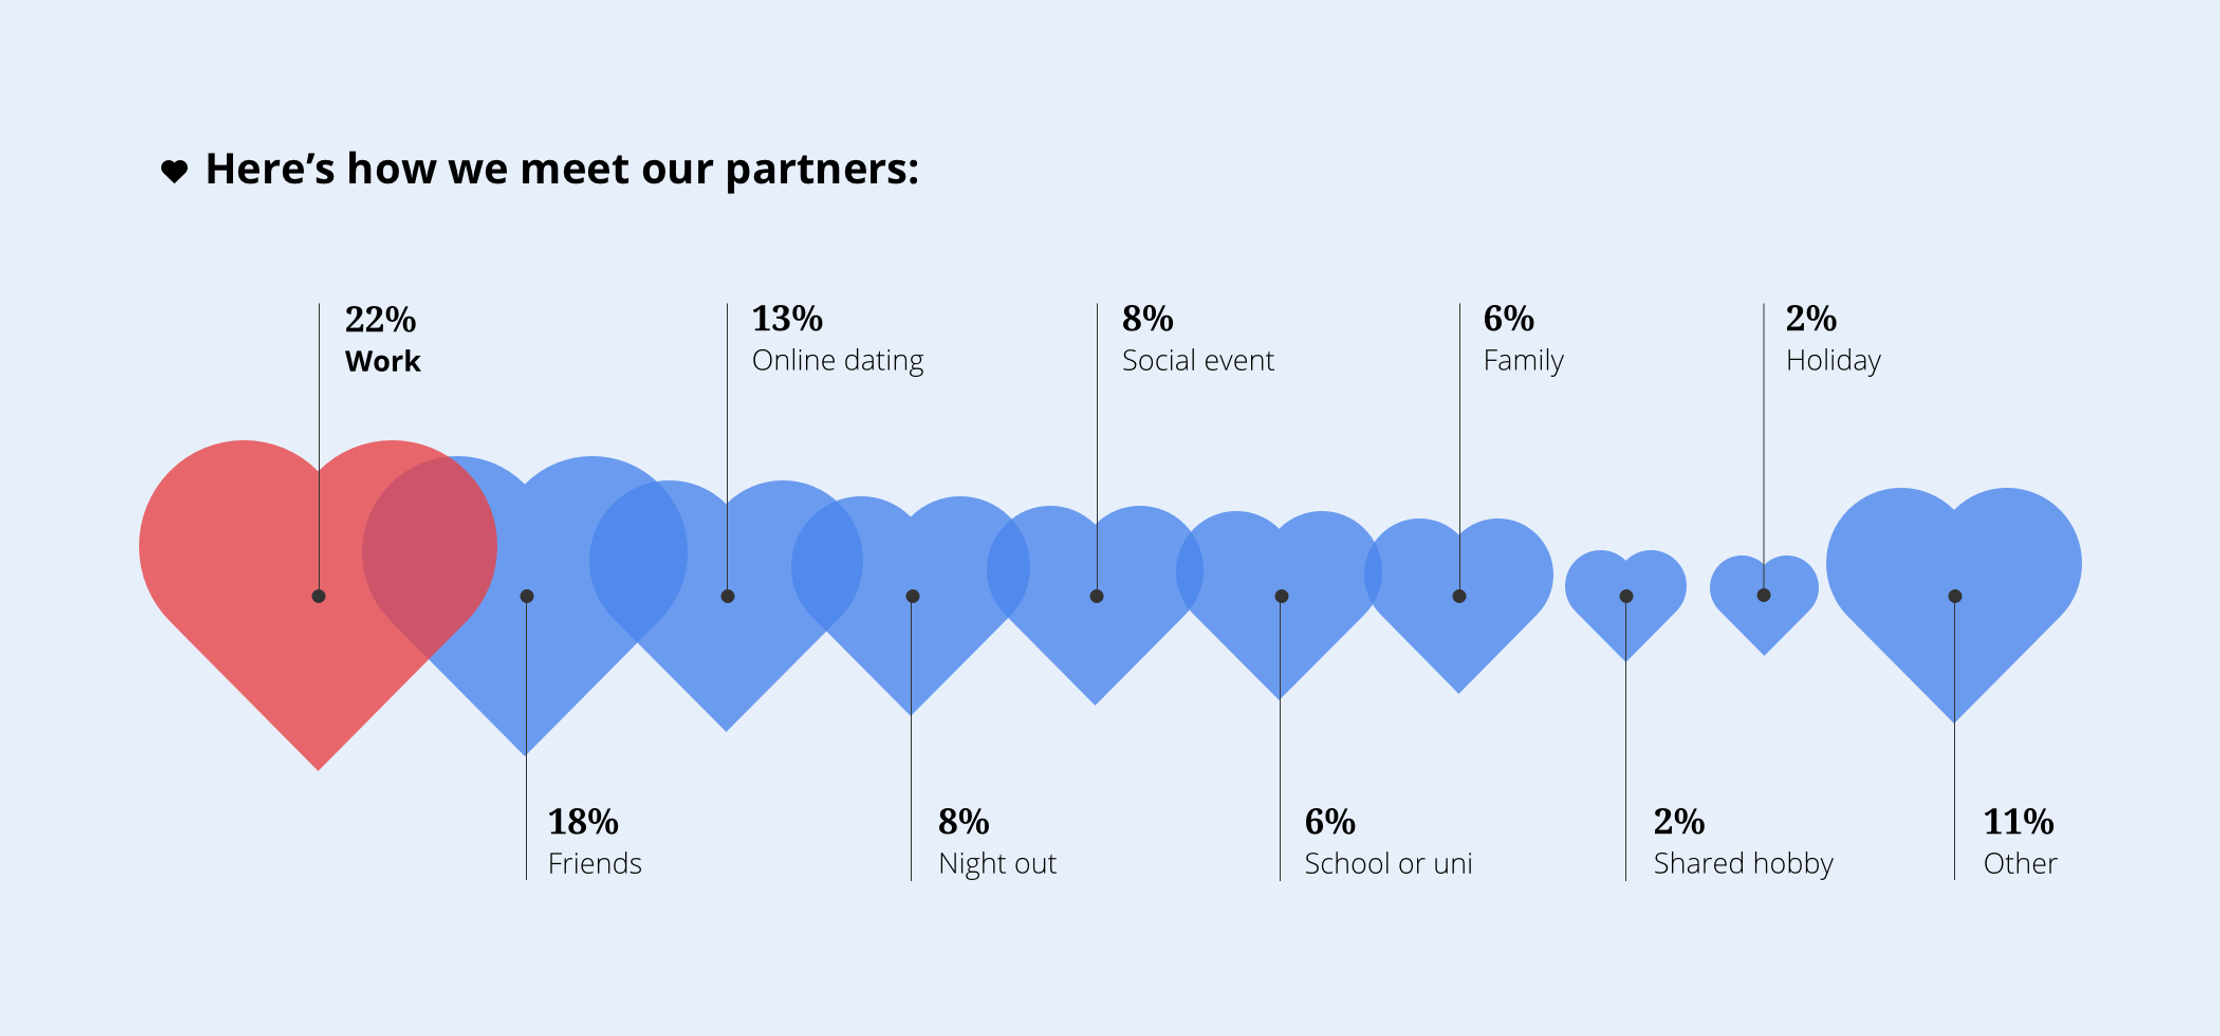 A proportional area chart showing the different places people meet their partners. Each area is in the shape of a love heart. It shows that the workplace is the most common place, with 22% of people meeting there.